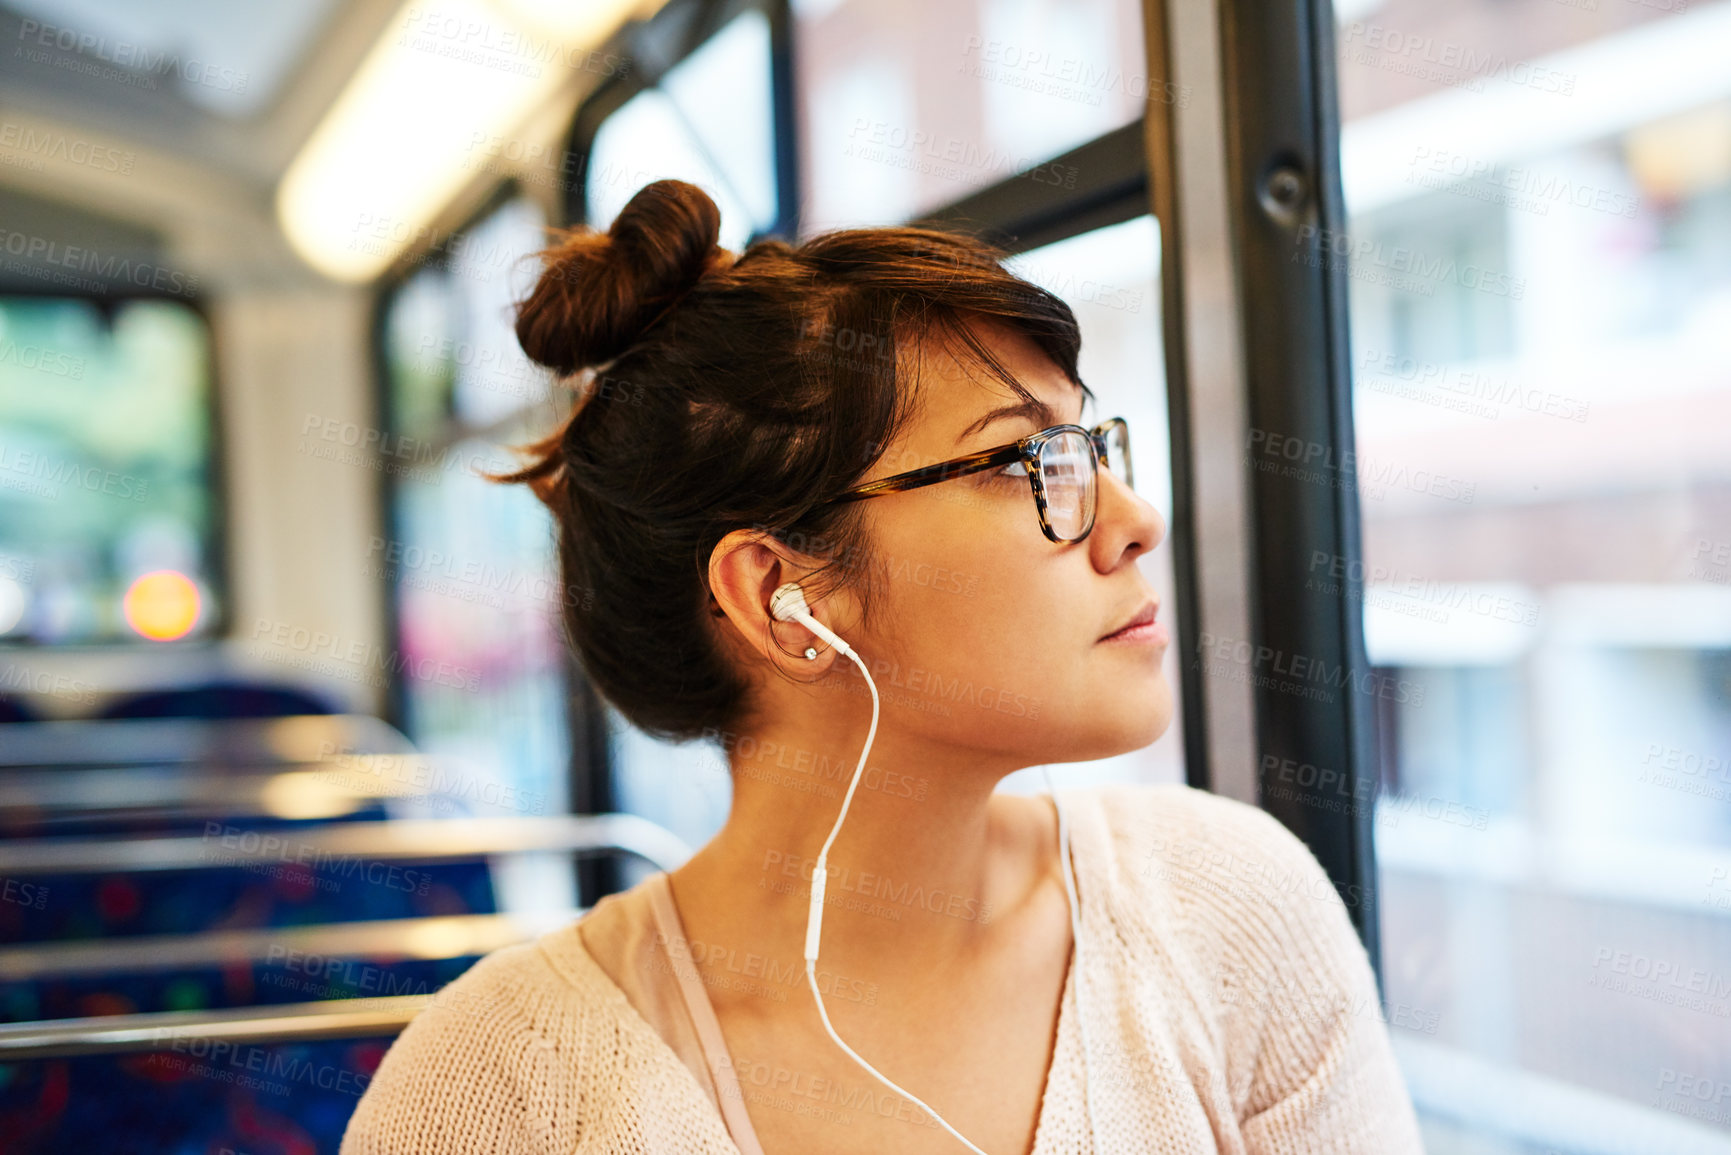 Buy stock photo Cropped shot of an attractive young woman listening to music while sitting on a bus